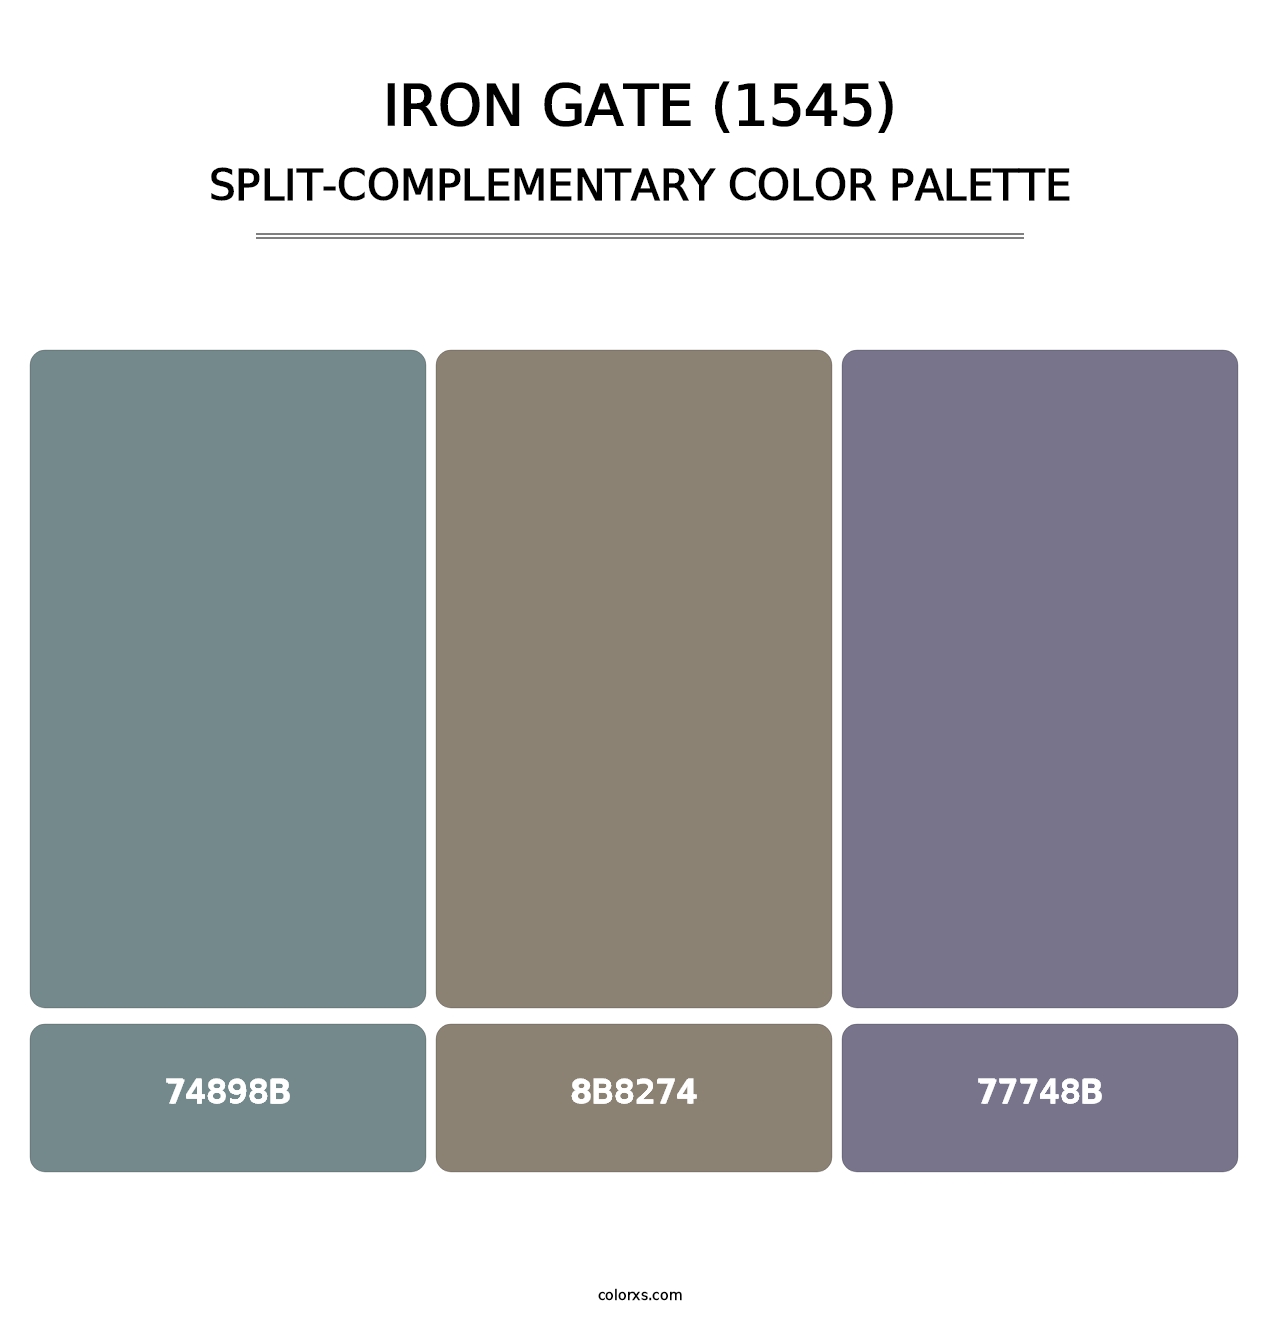 Iron Gate (1545) - Split-Complementary Color Palette